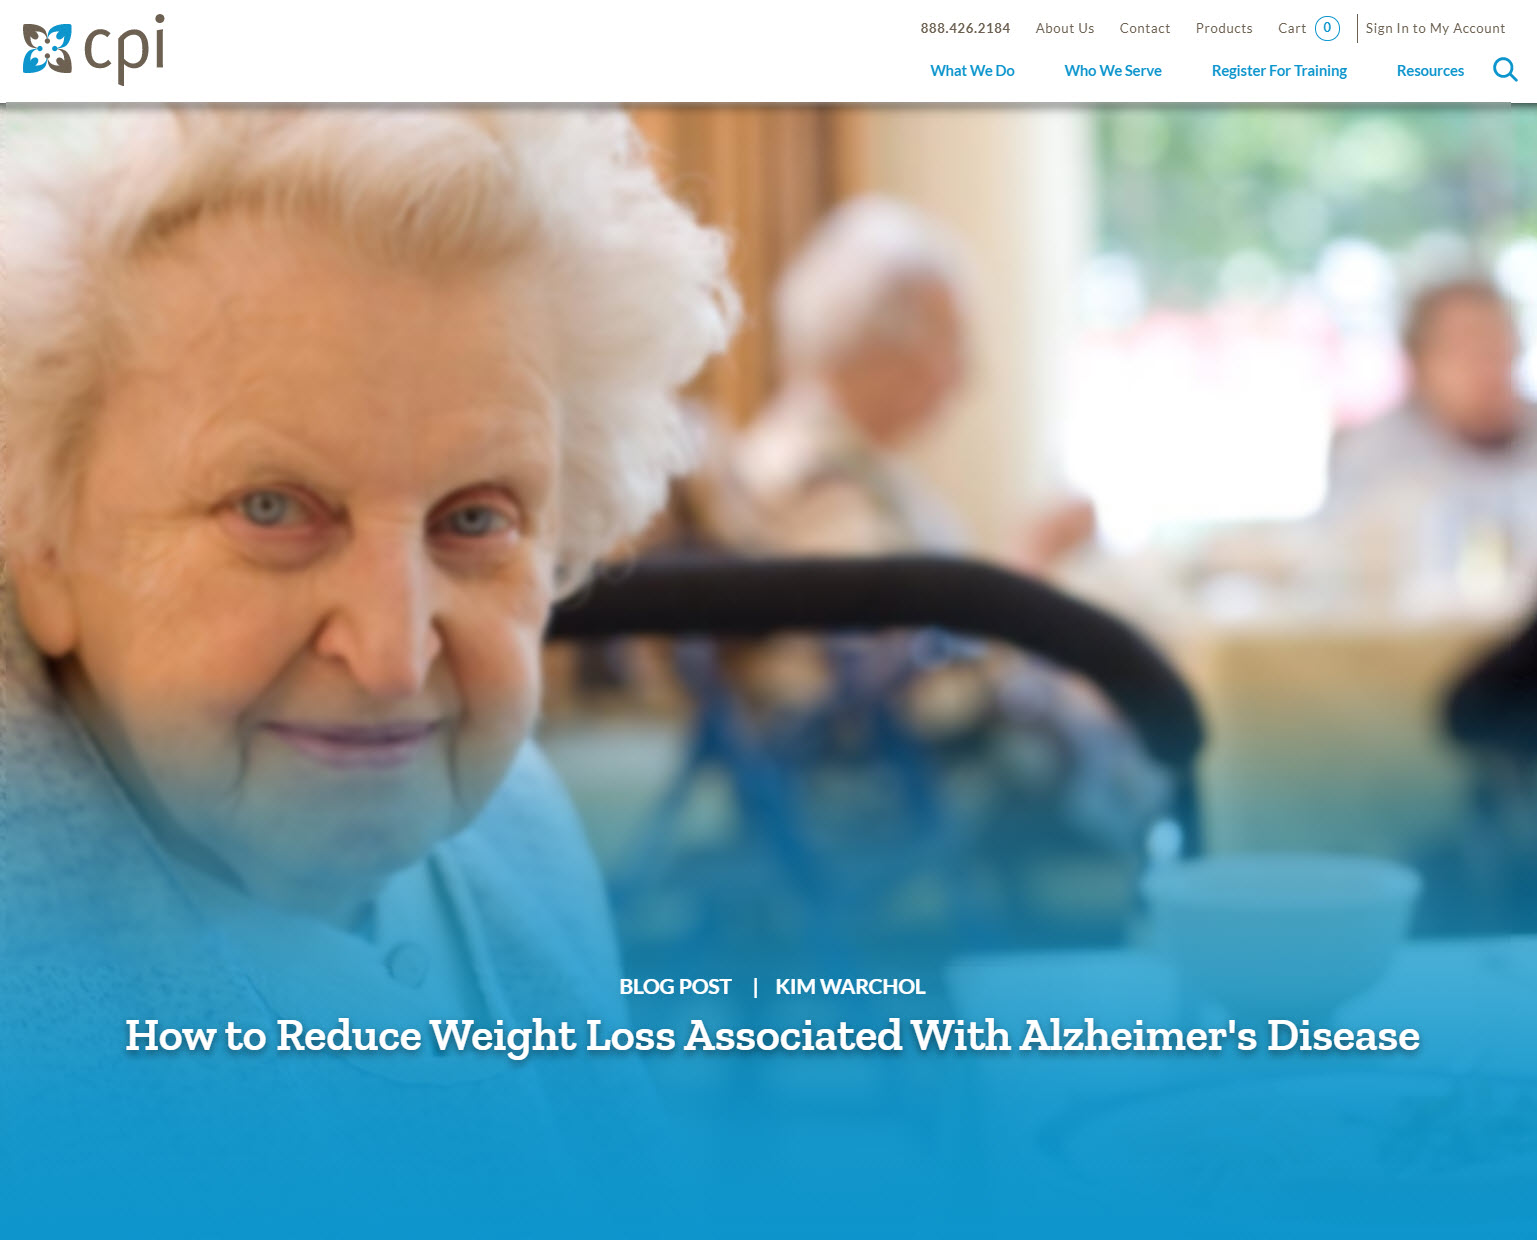 How to Reduce Weight Loss Associated With Alzheimer's Disease